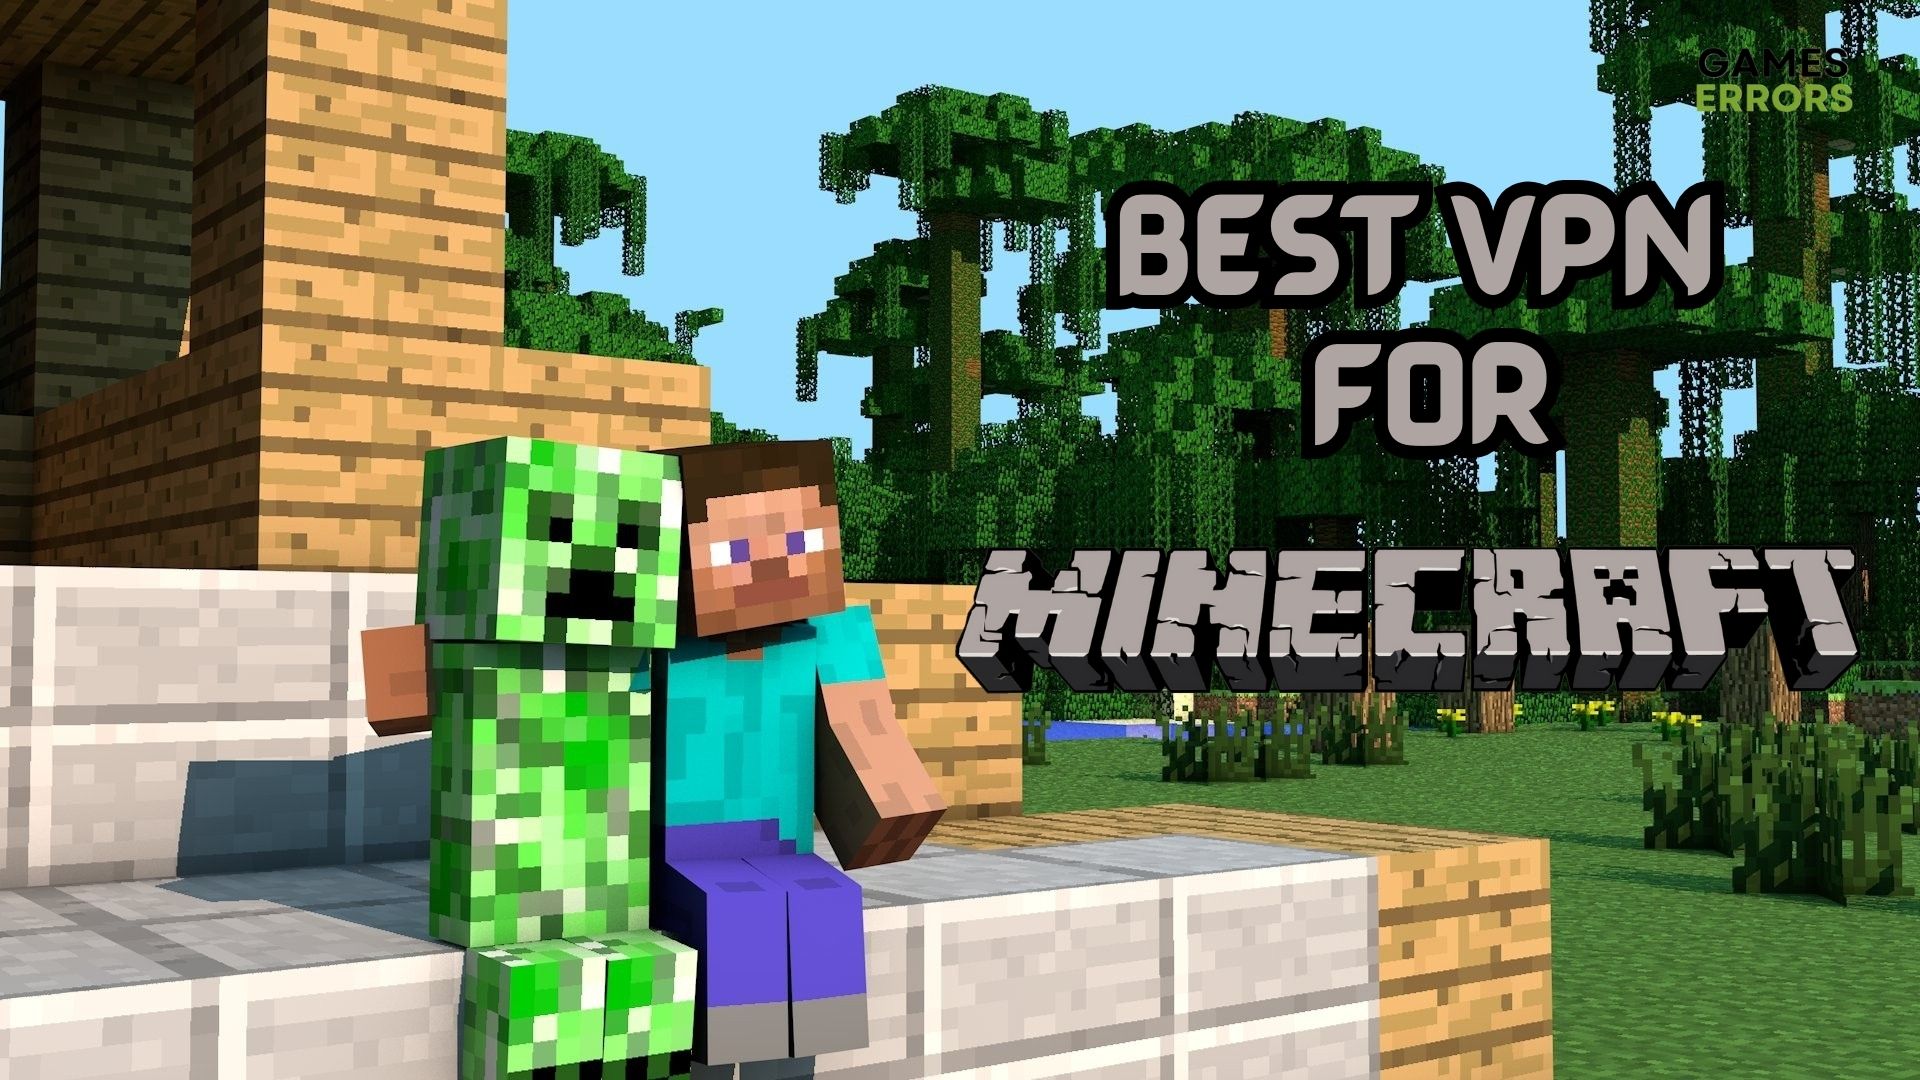 Best VPN for Minecraft: Check Out The Most Popular Solutions